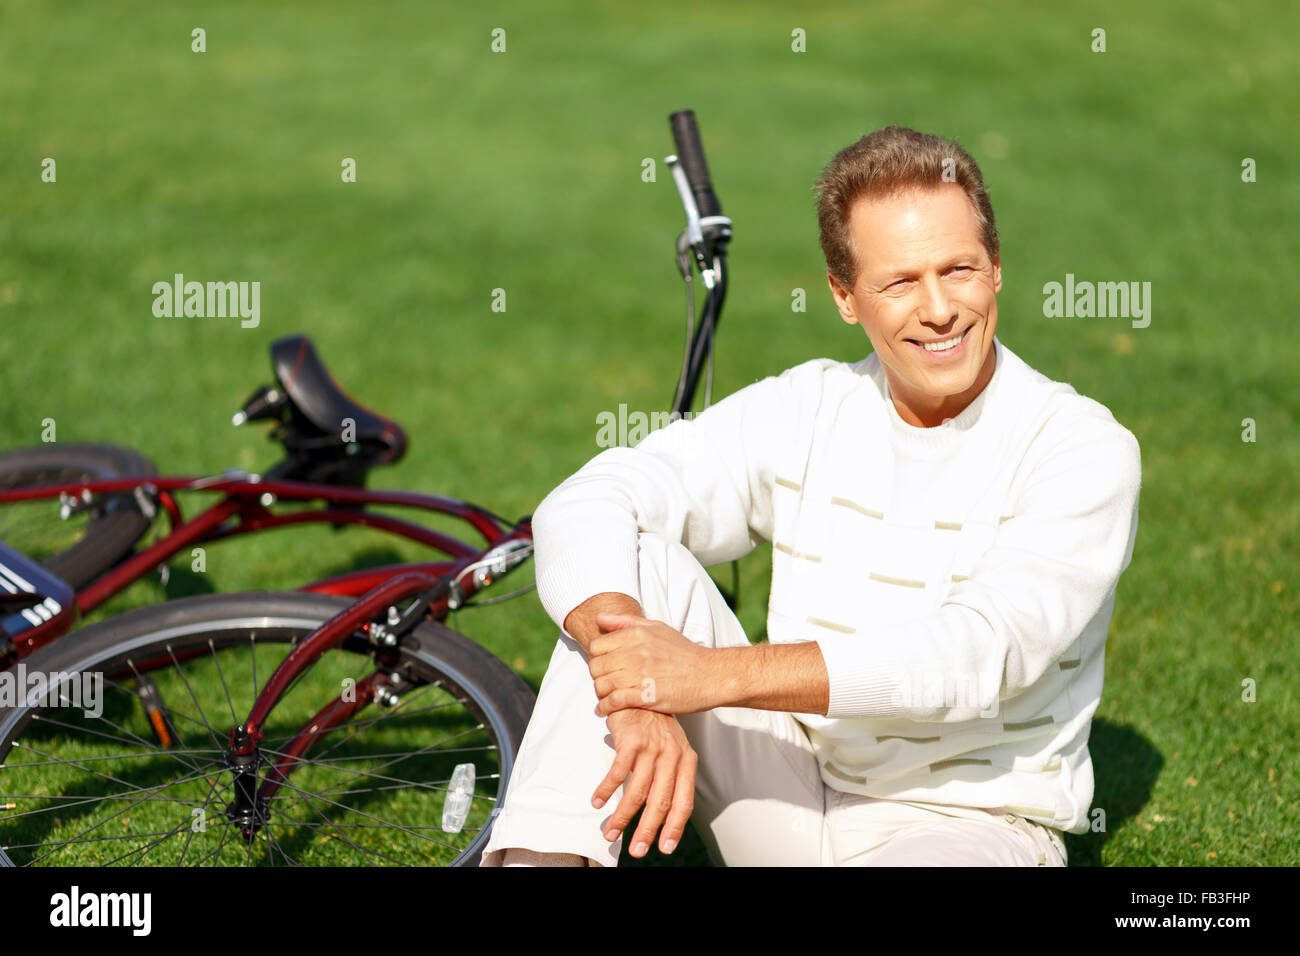 Hot man riding a bicycle Banque D'Images